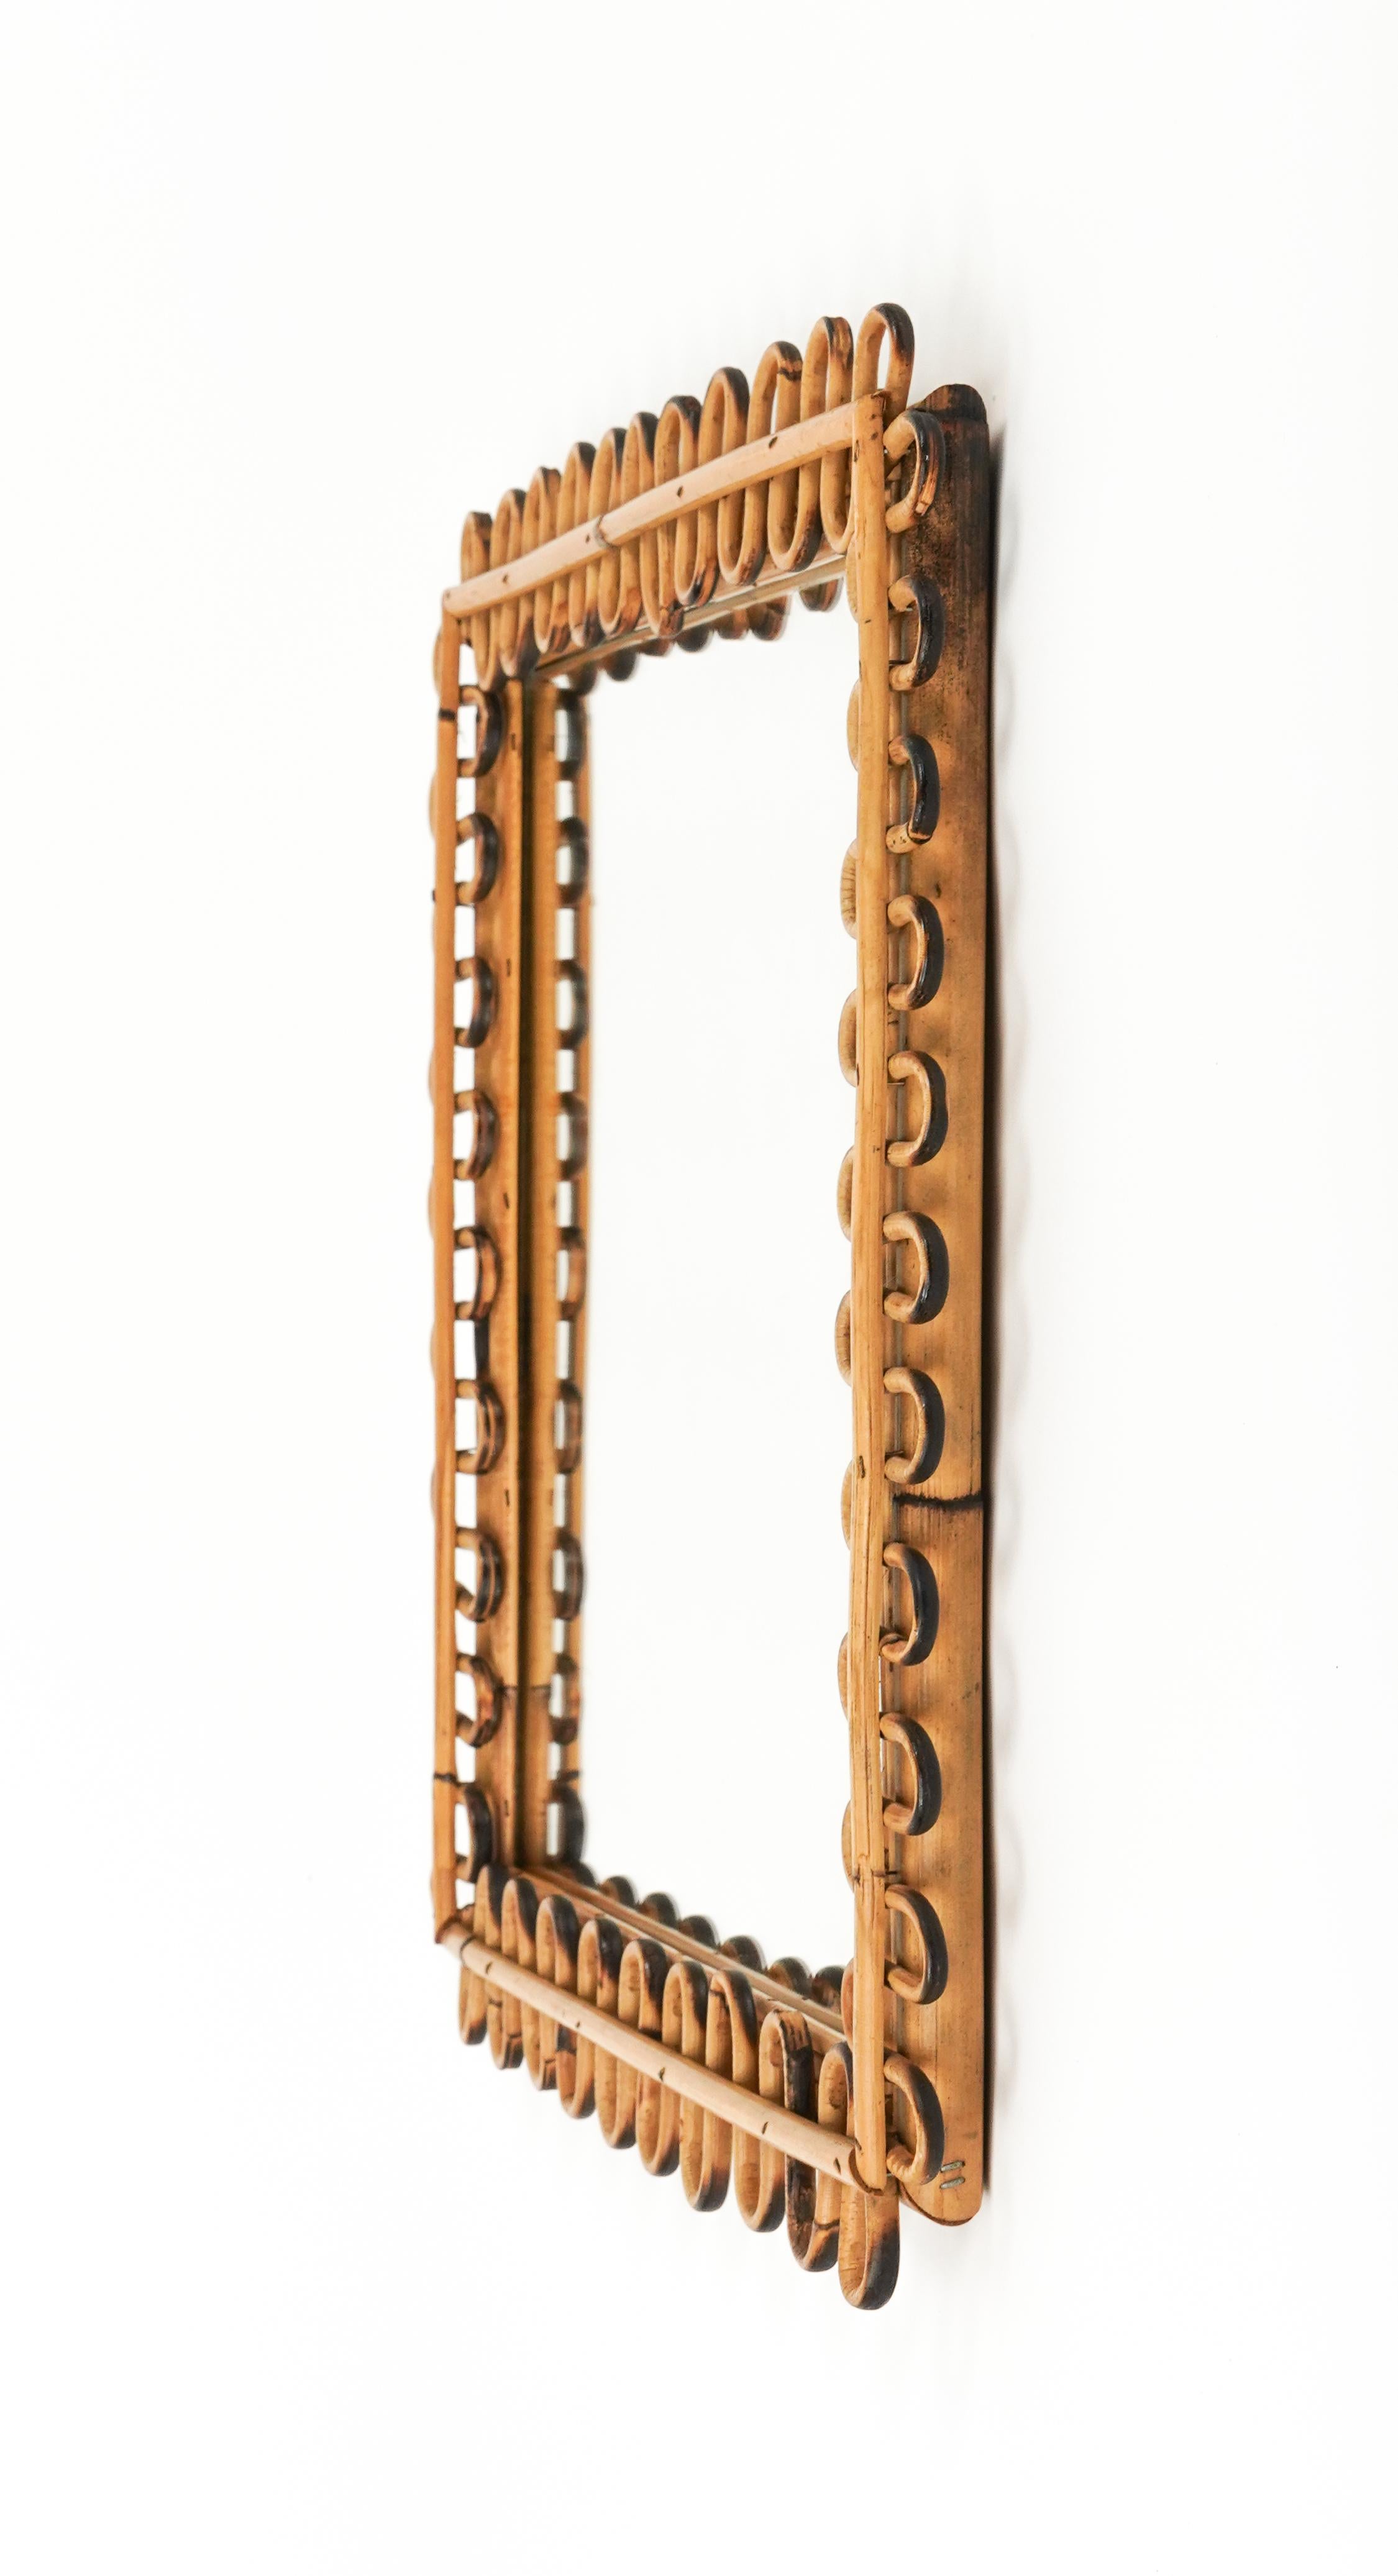 Midcentury Rattan & Bamboo Squared Wall Mirror Franco Albini Style, Italy 1960s For Sale 4